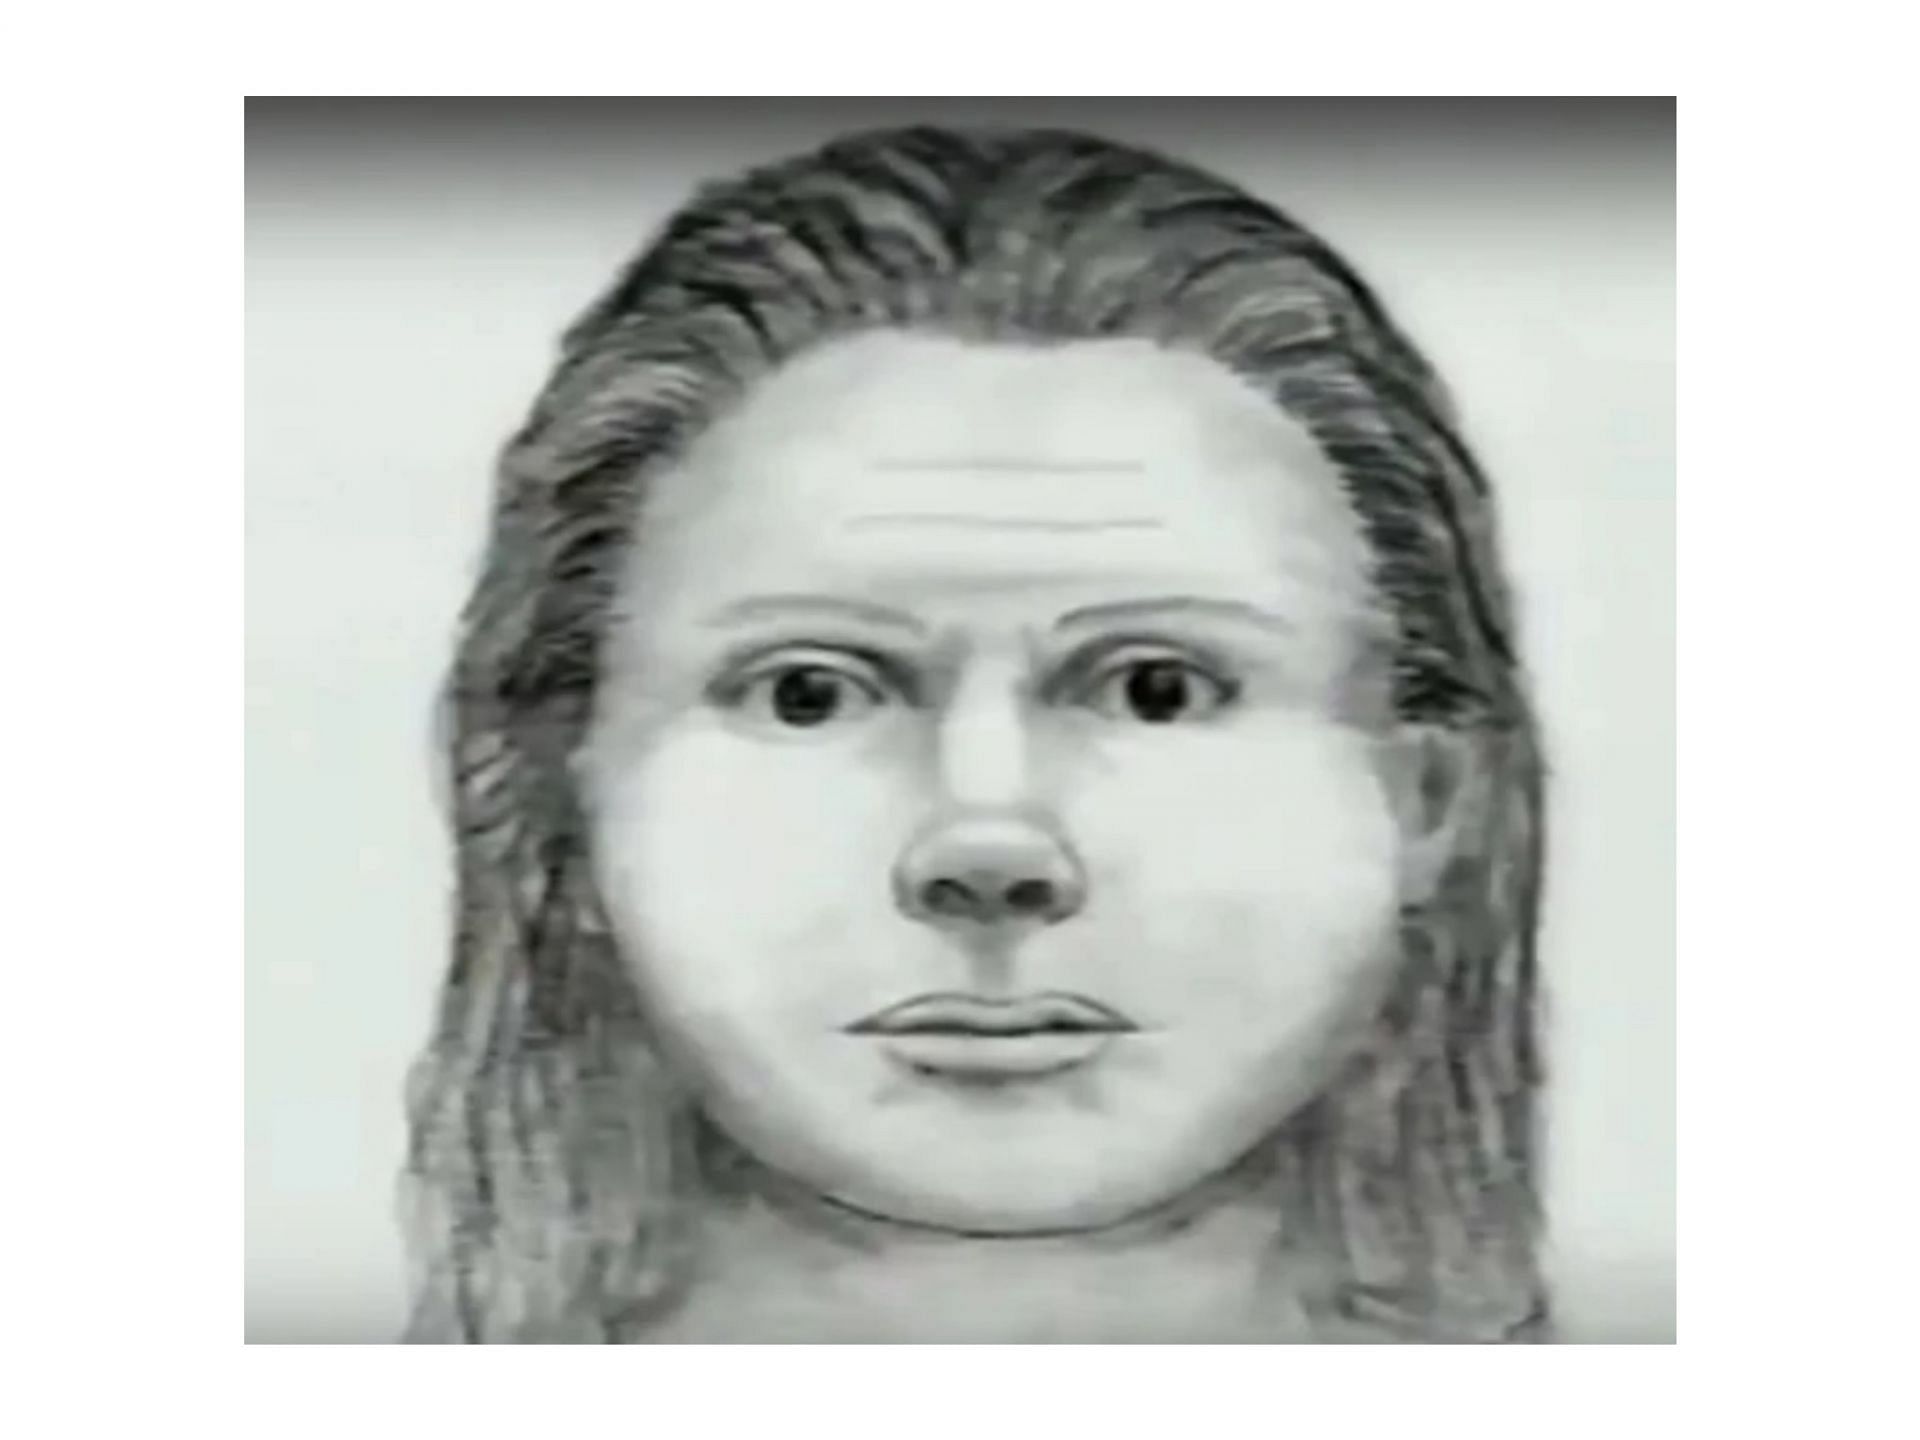 The composite sketch of David Radmaker (Image via Unsolved Mysteries Wiki)